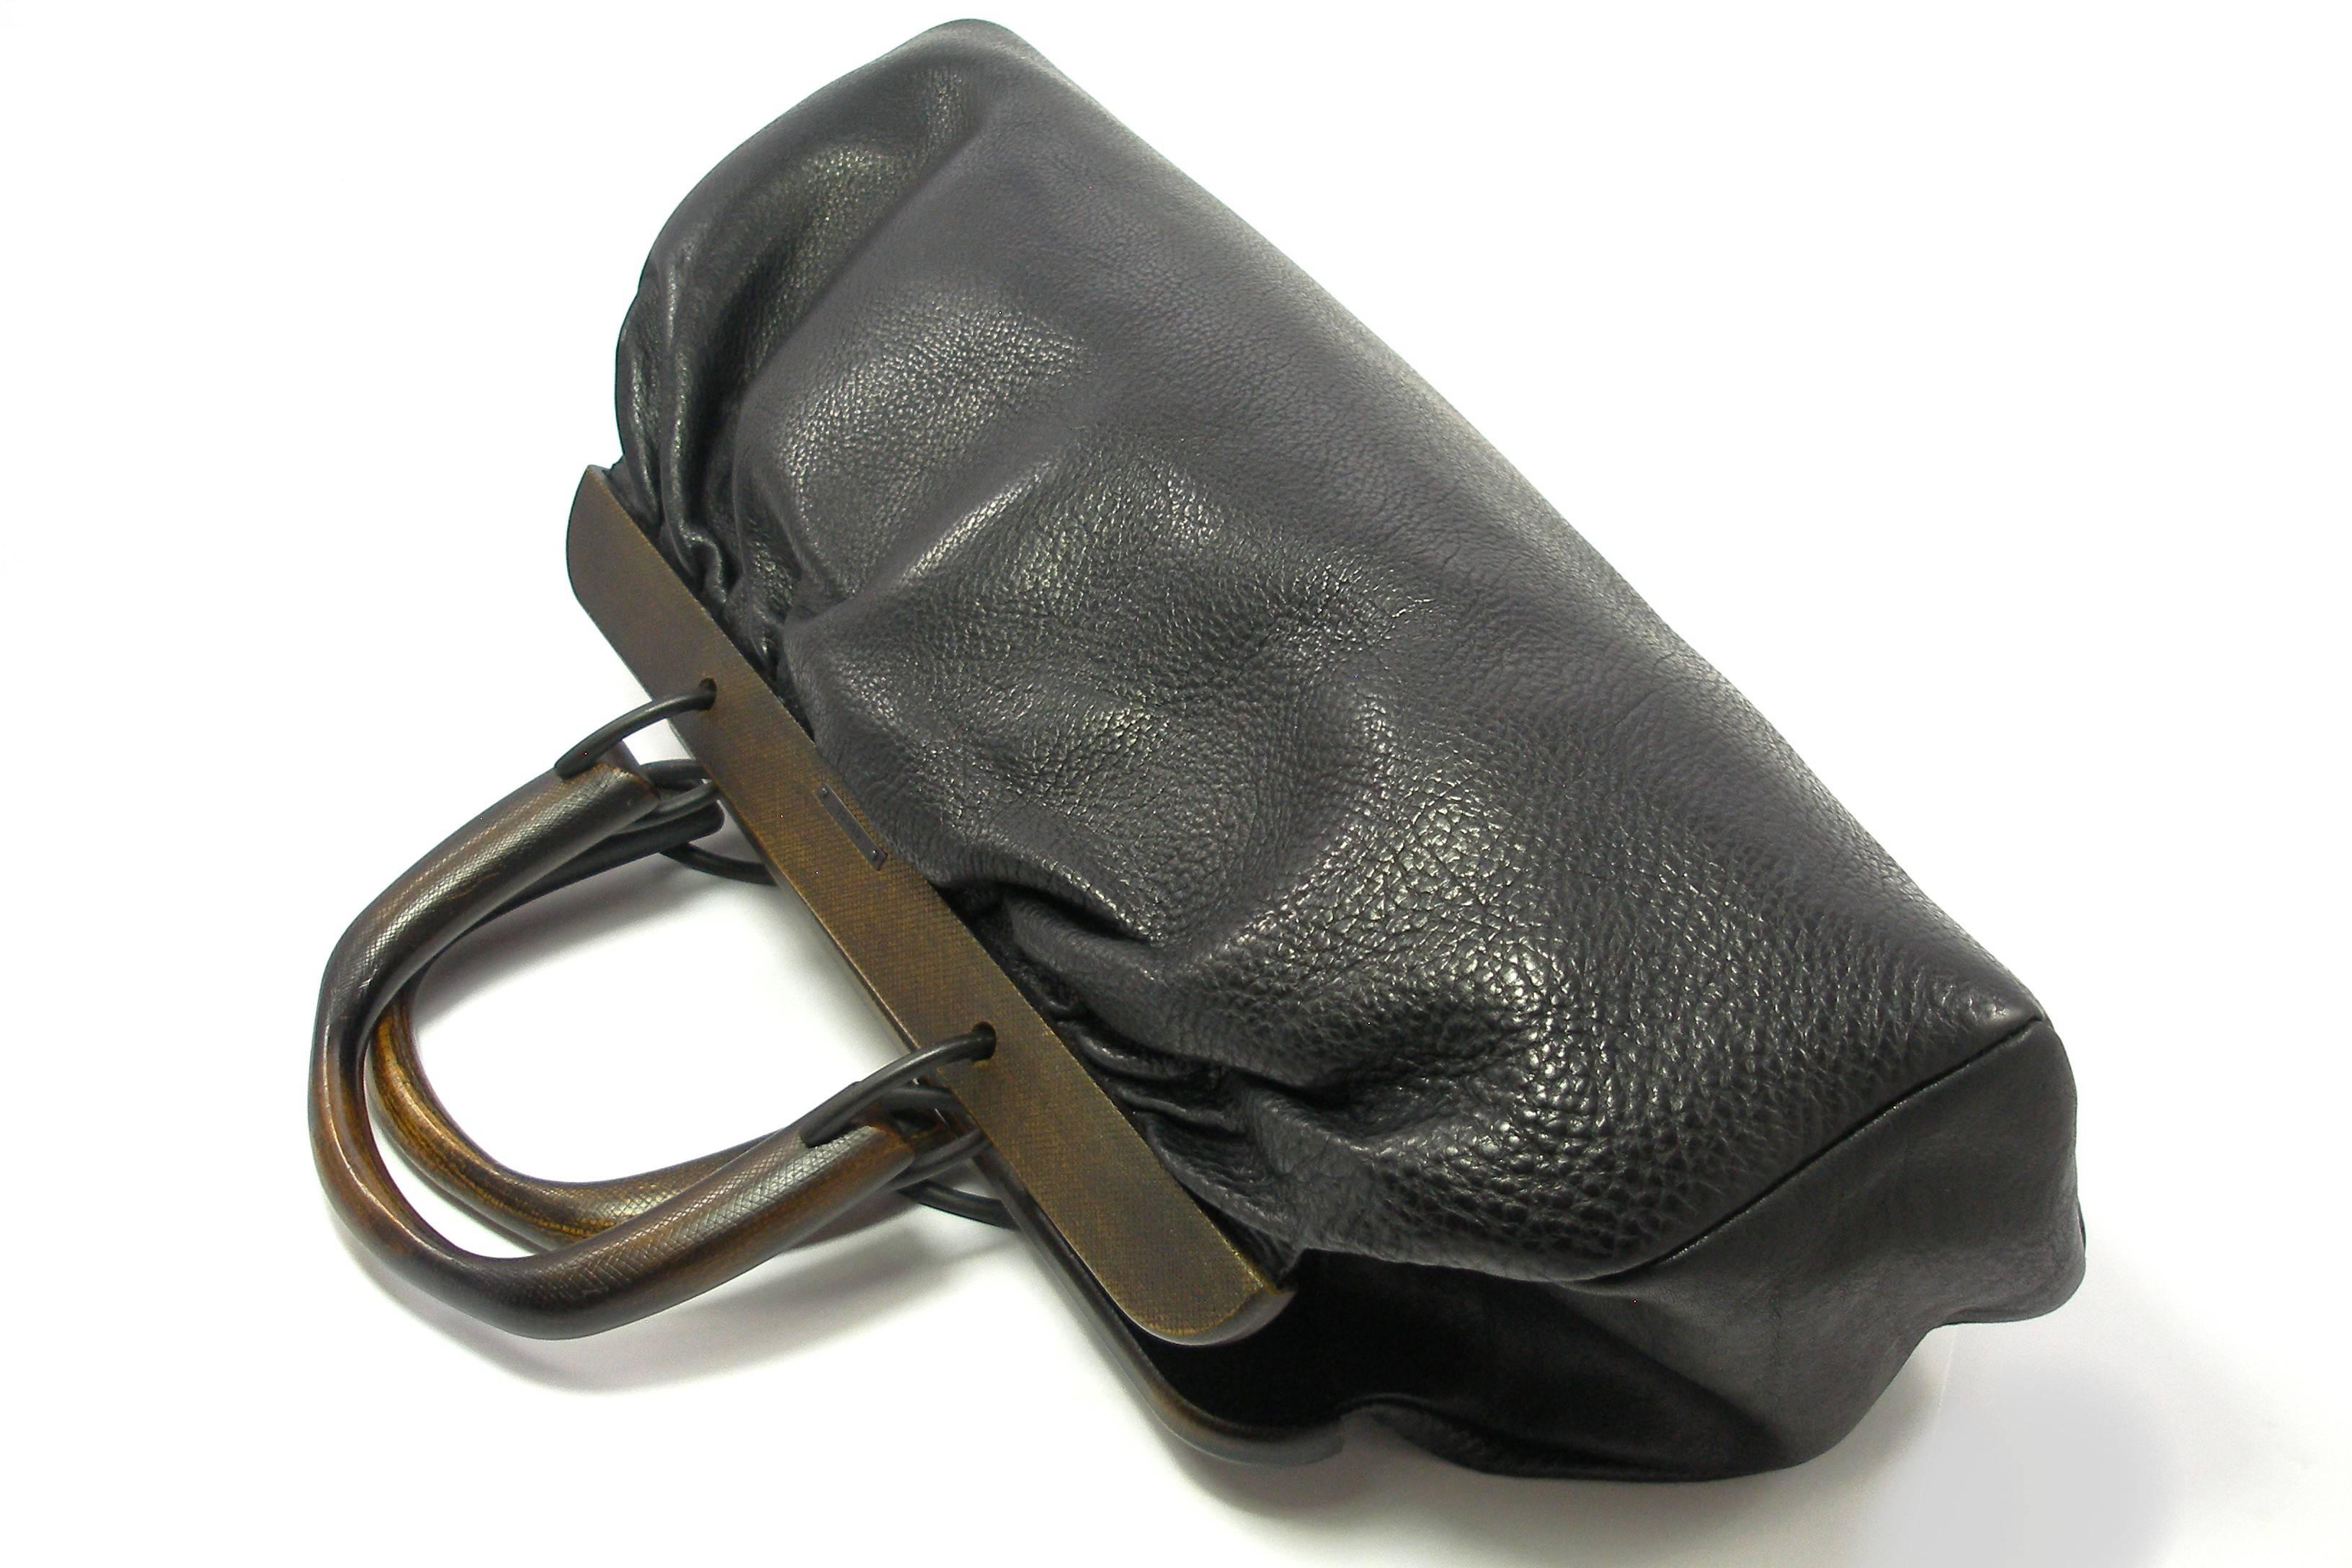 bag with wooden handles